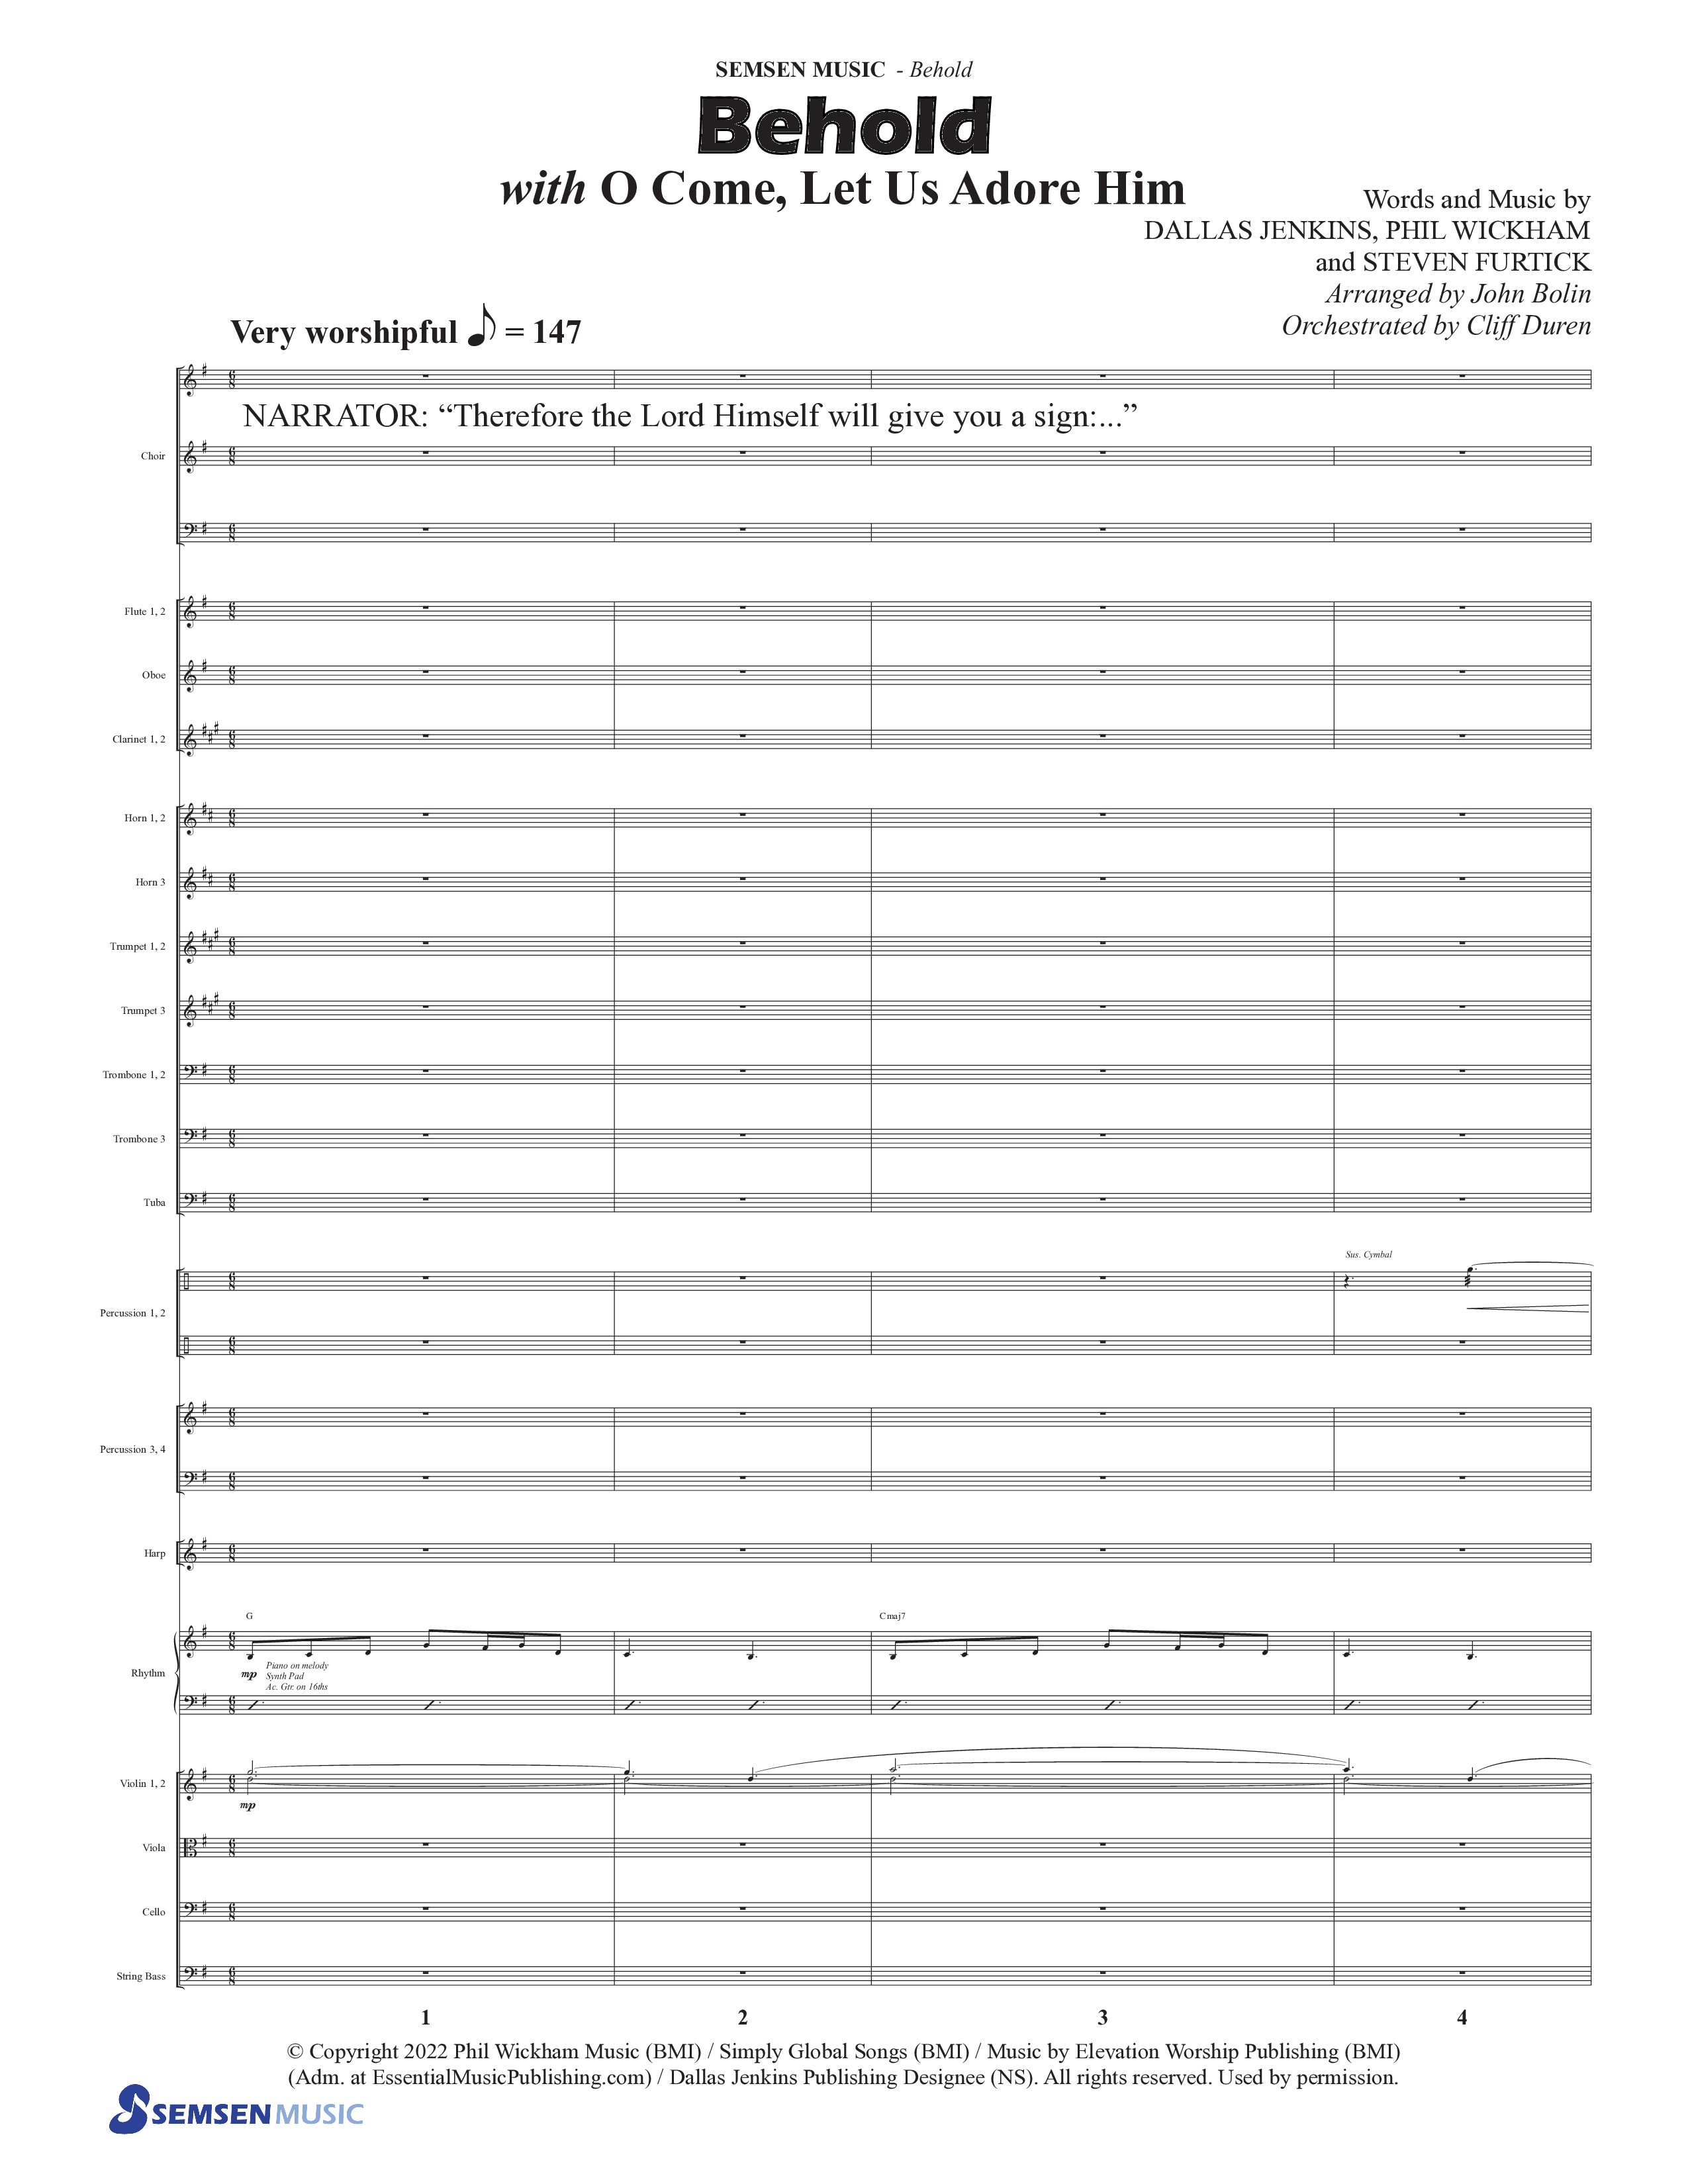 Behold (9 Song Choral Collection) Song 7 (Orchestration) (Semsen Music / Arr. John Bolin / Orch. Cliff Duren)